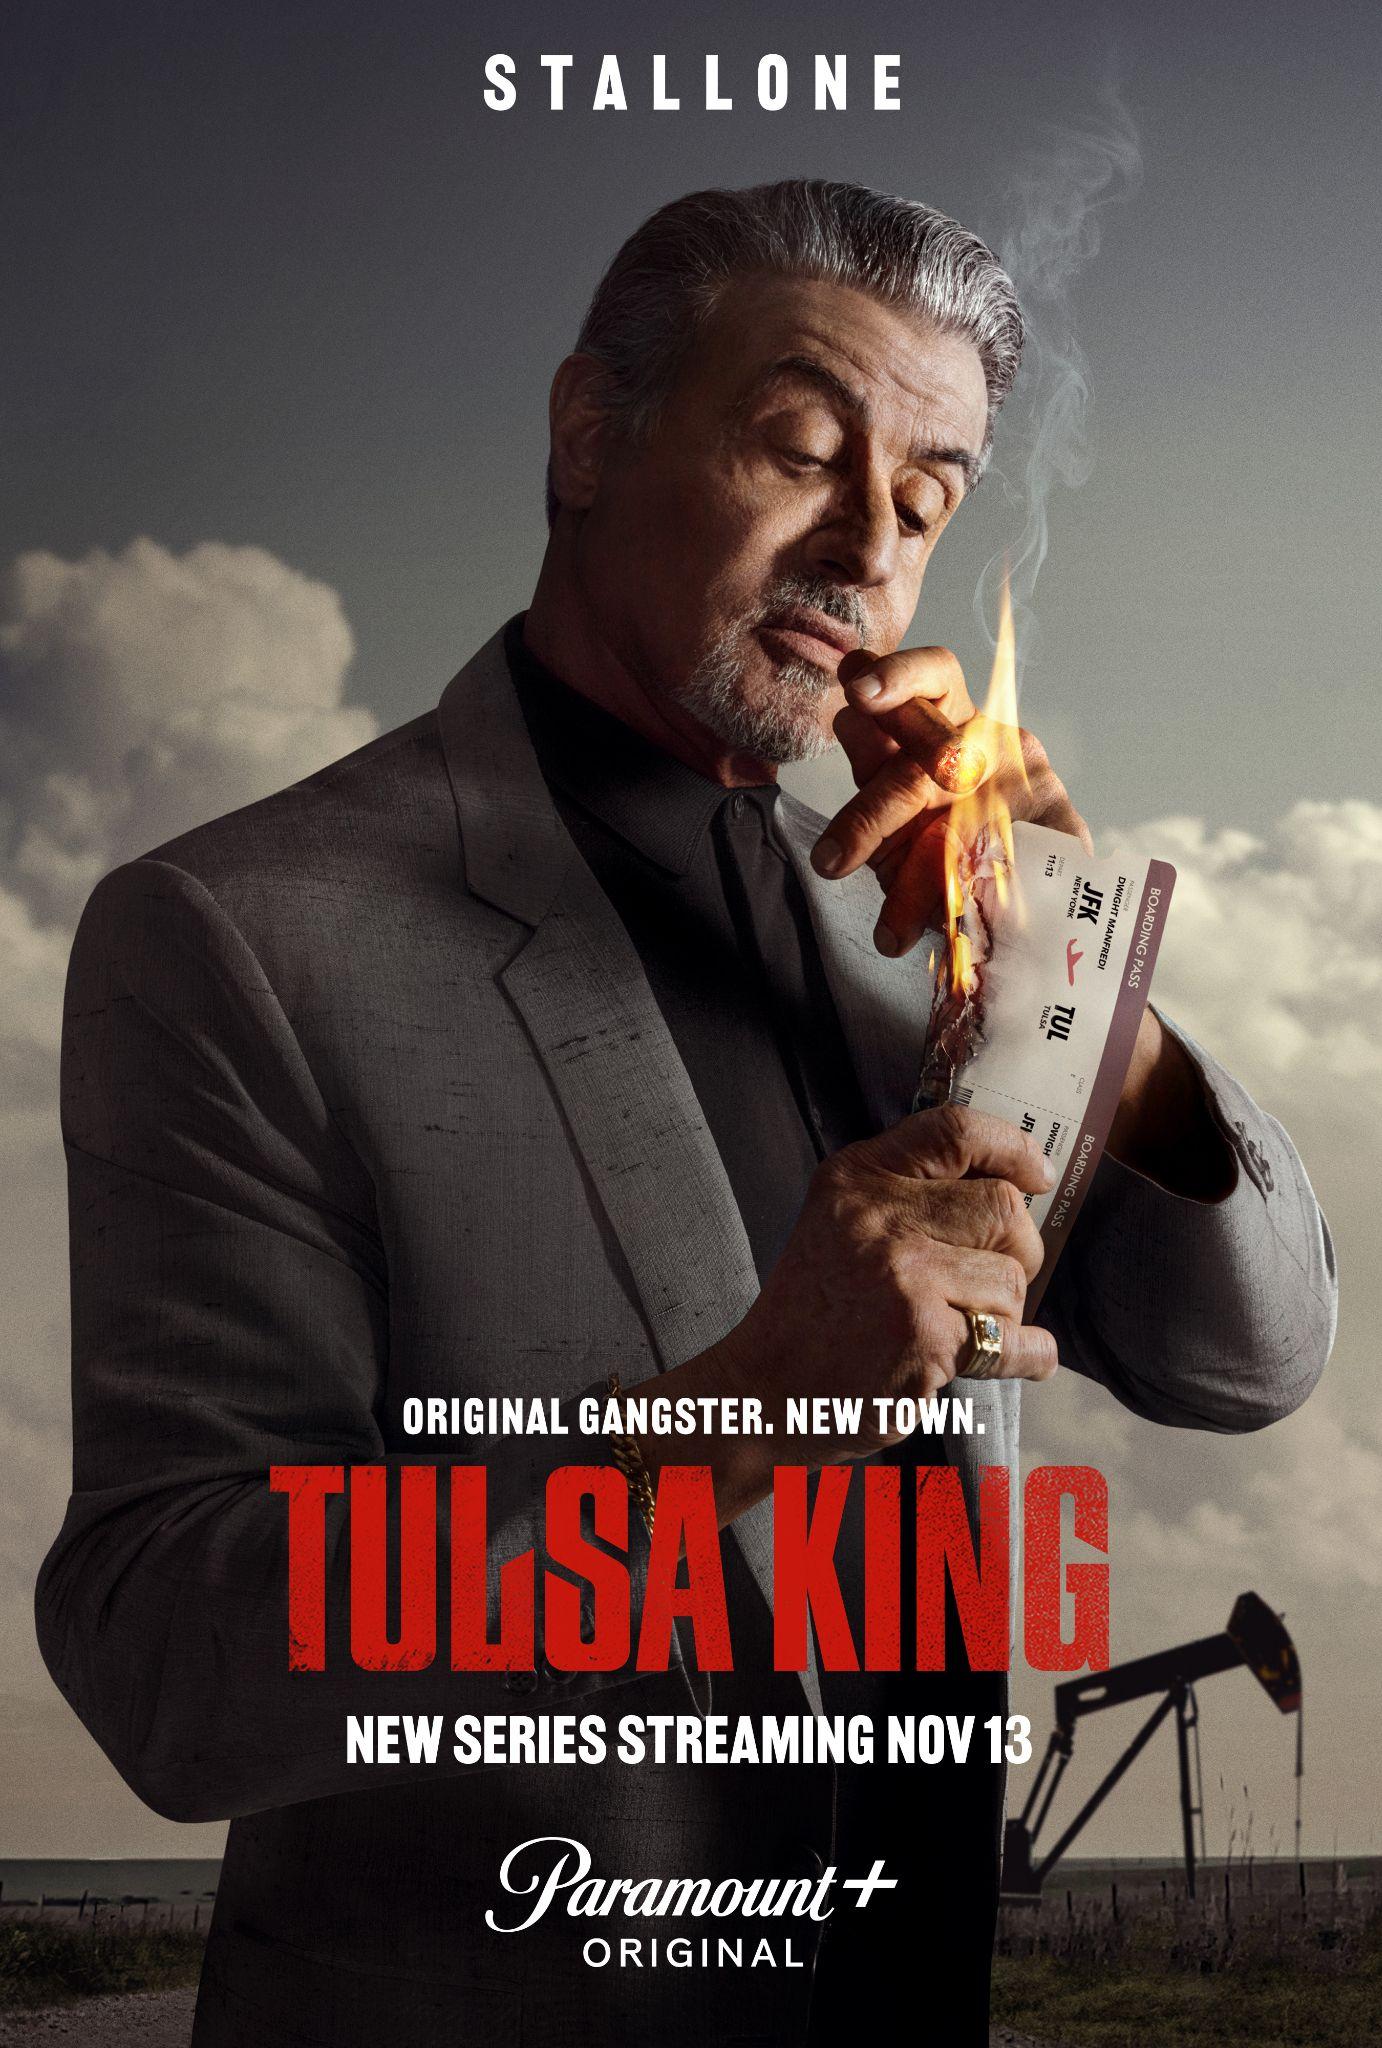 Paramount Press Express  PARAMOUNT+ DEBUTS THE OFFICIAL TRAILER AND TEASER  ART FOR NEW ORIGINAL SERIES “TULSA KING” DURING THE NFL ON CBS